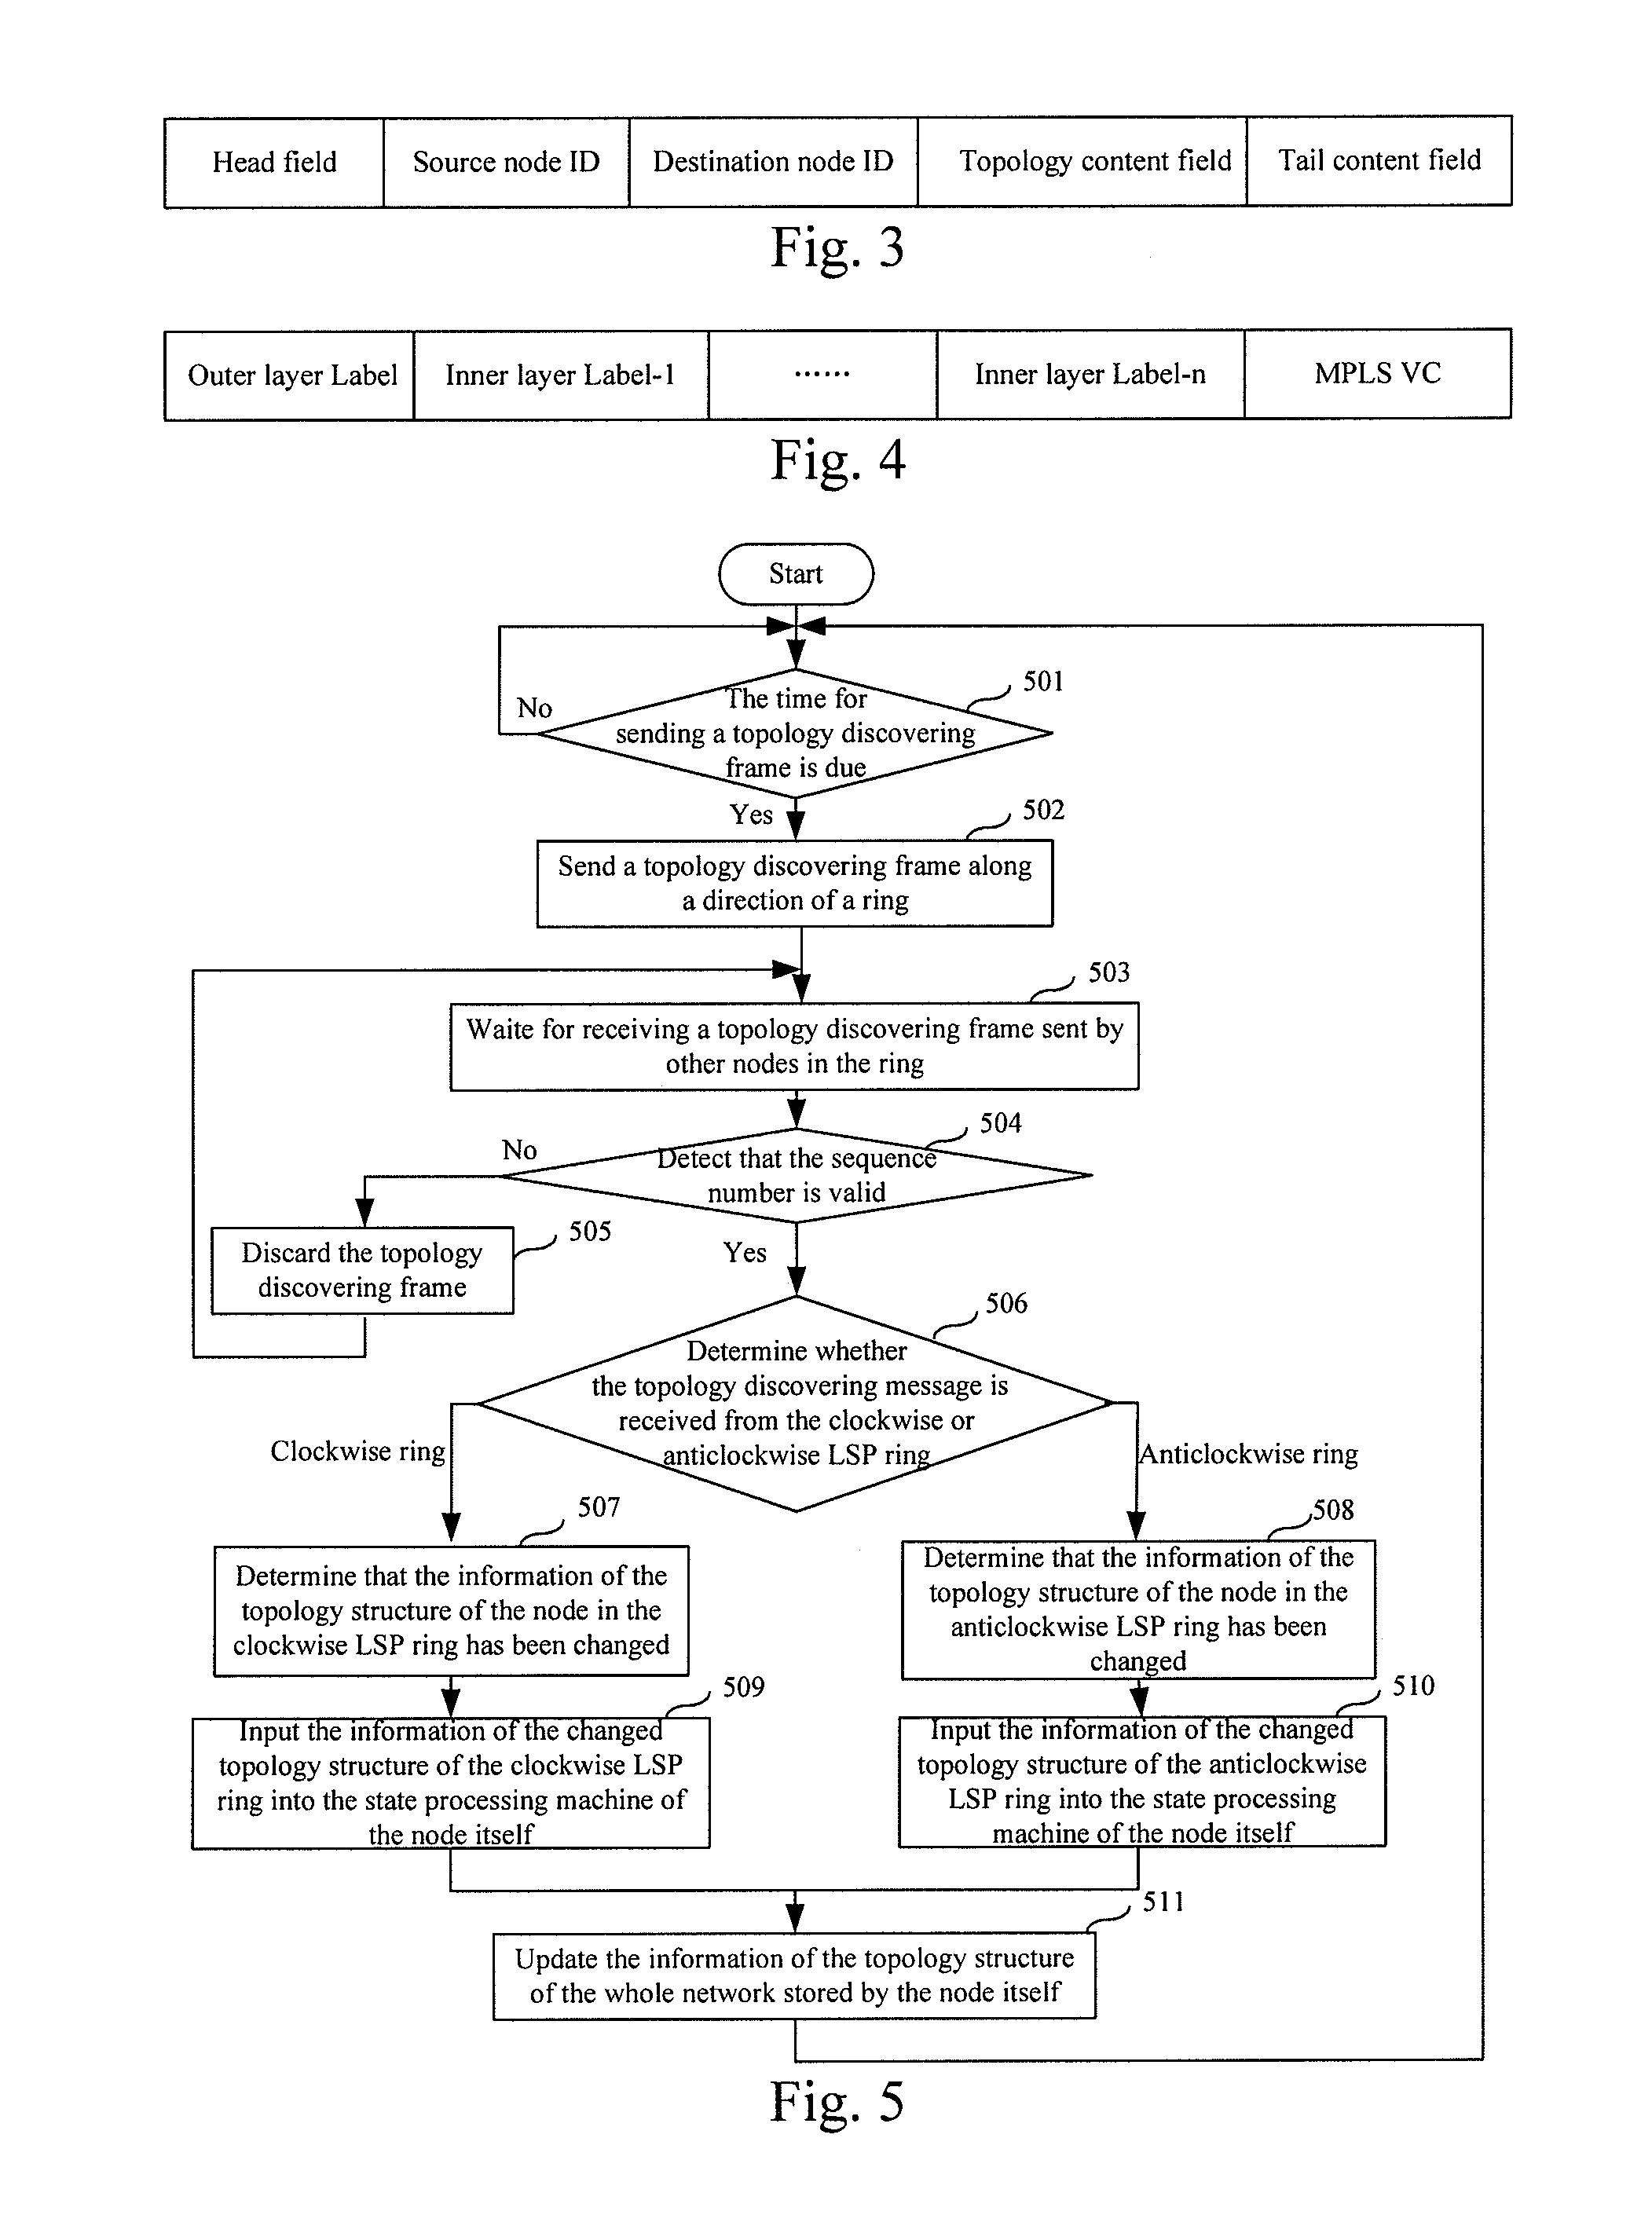 Method and node for discovering topology structure in multiprotocol label switching ring network